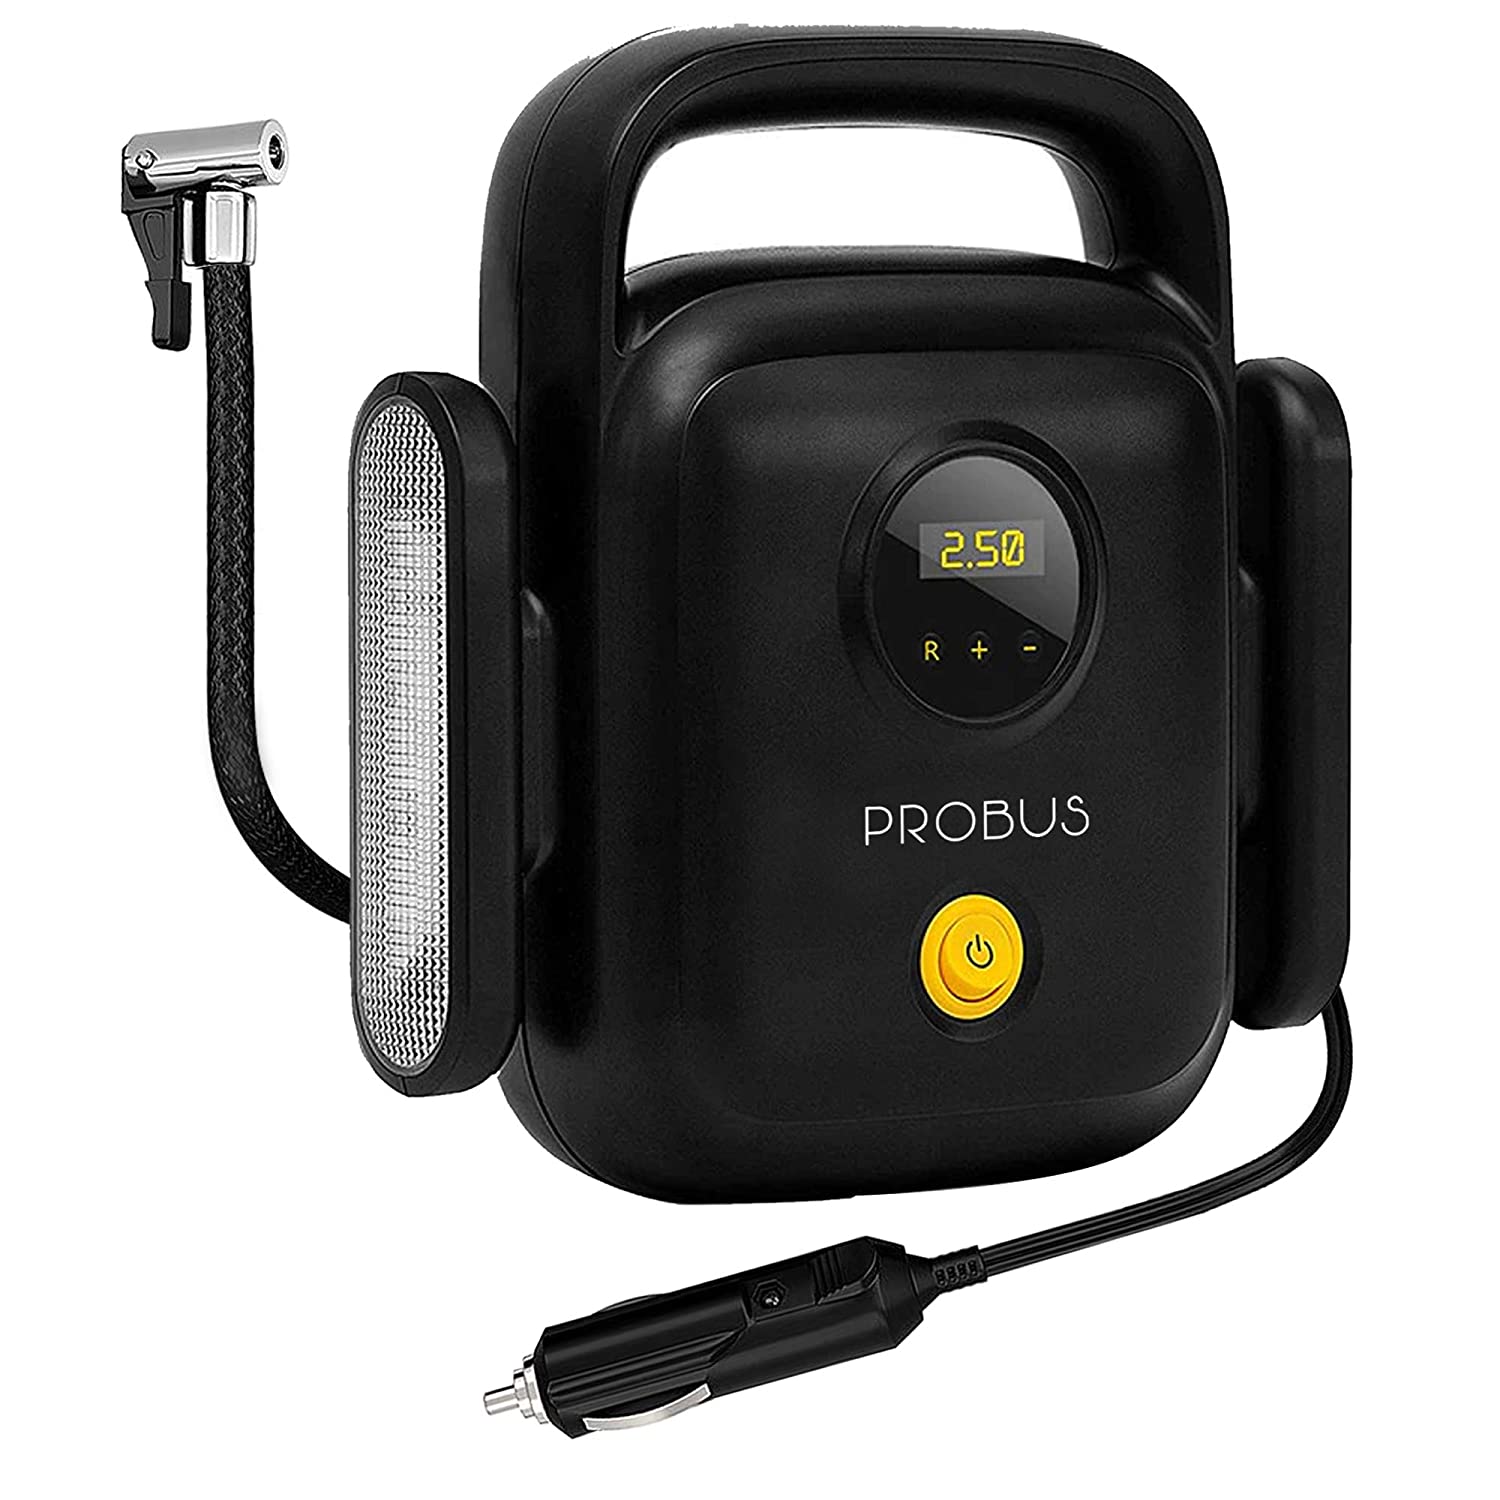 Probus Heavy Duty 150 Psi 4 Cylinders Compact Digital tyre Inflator